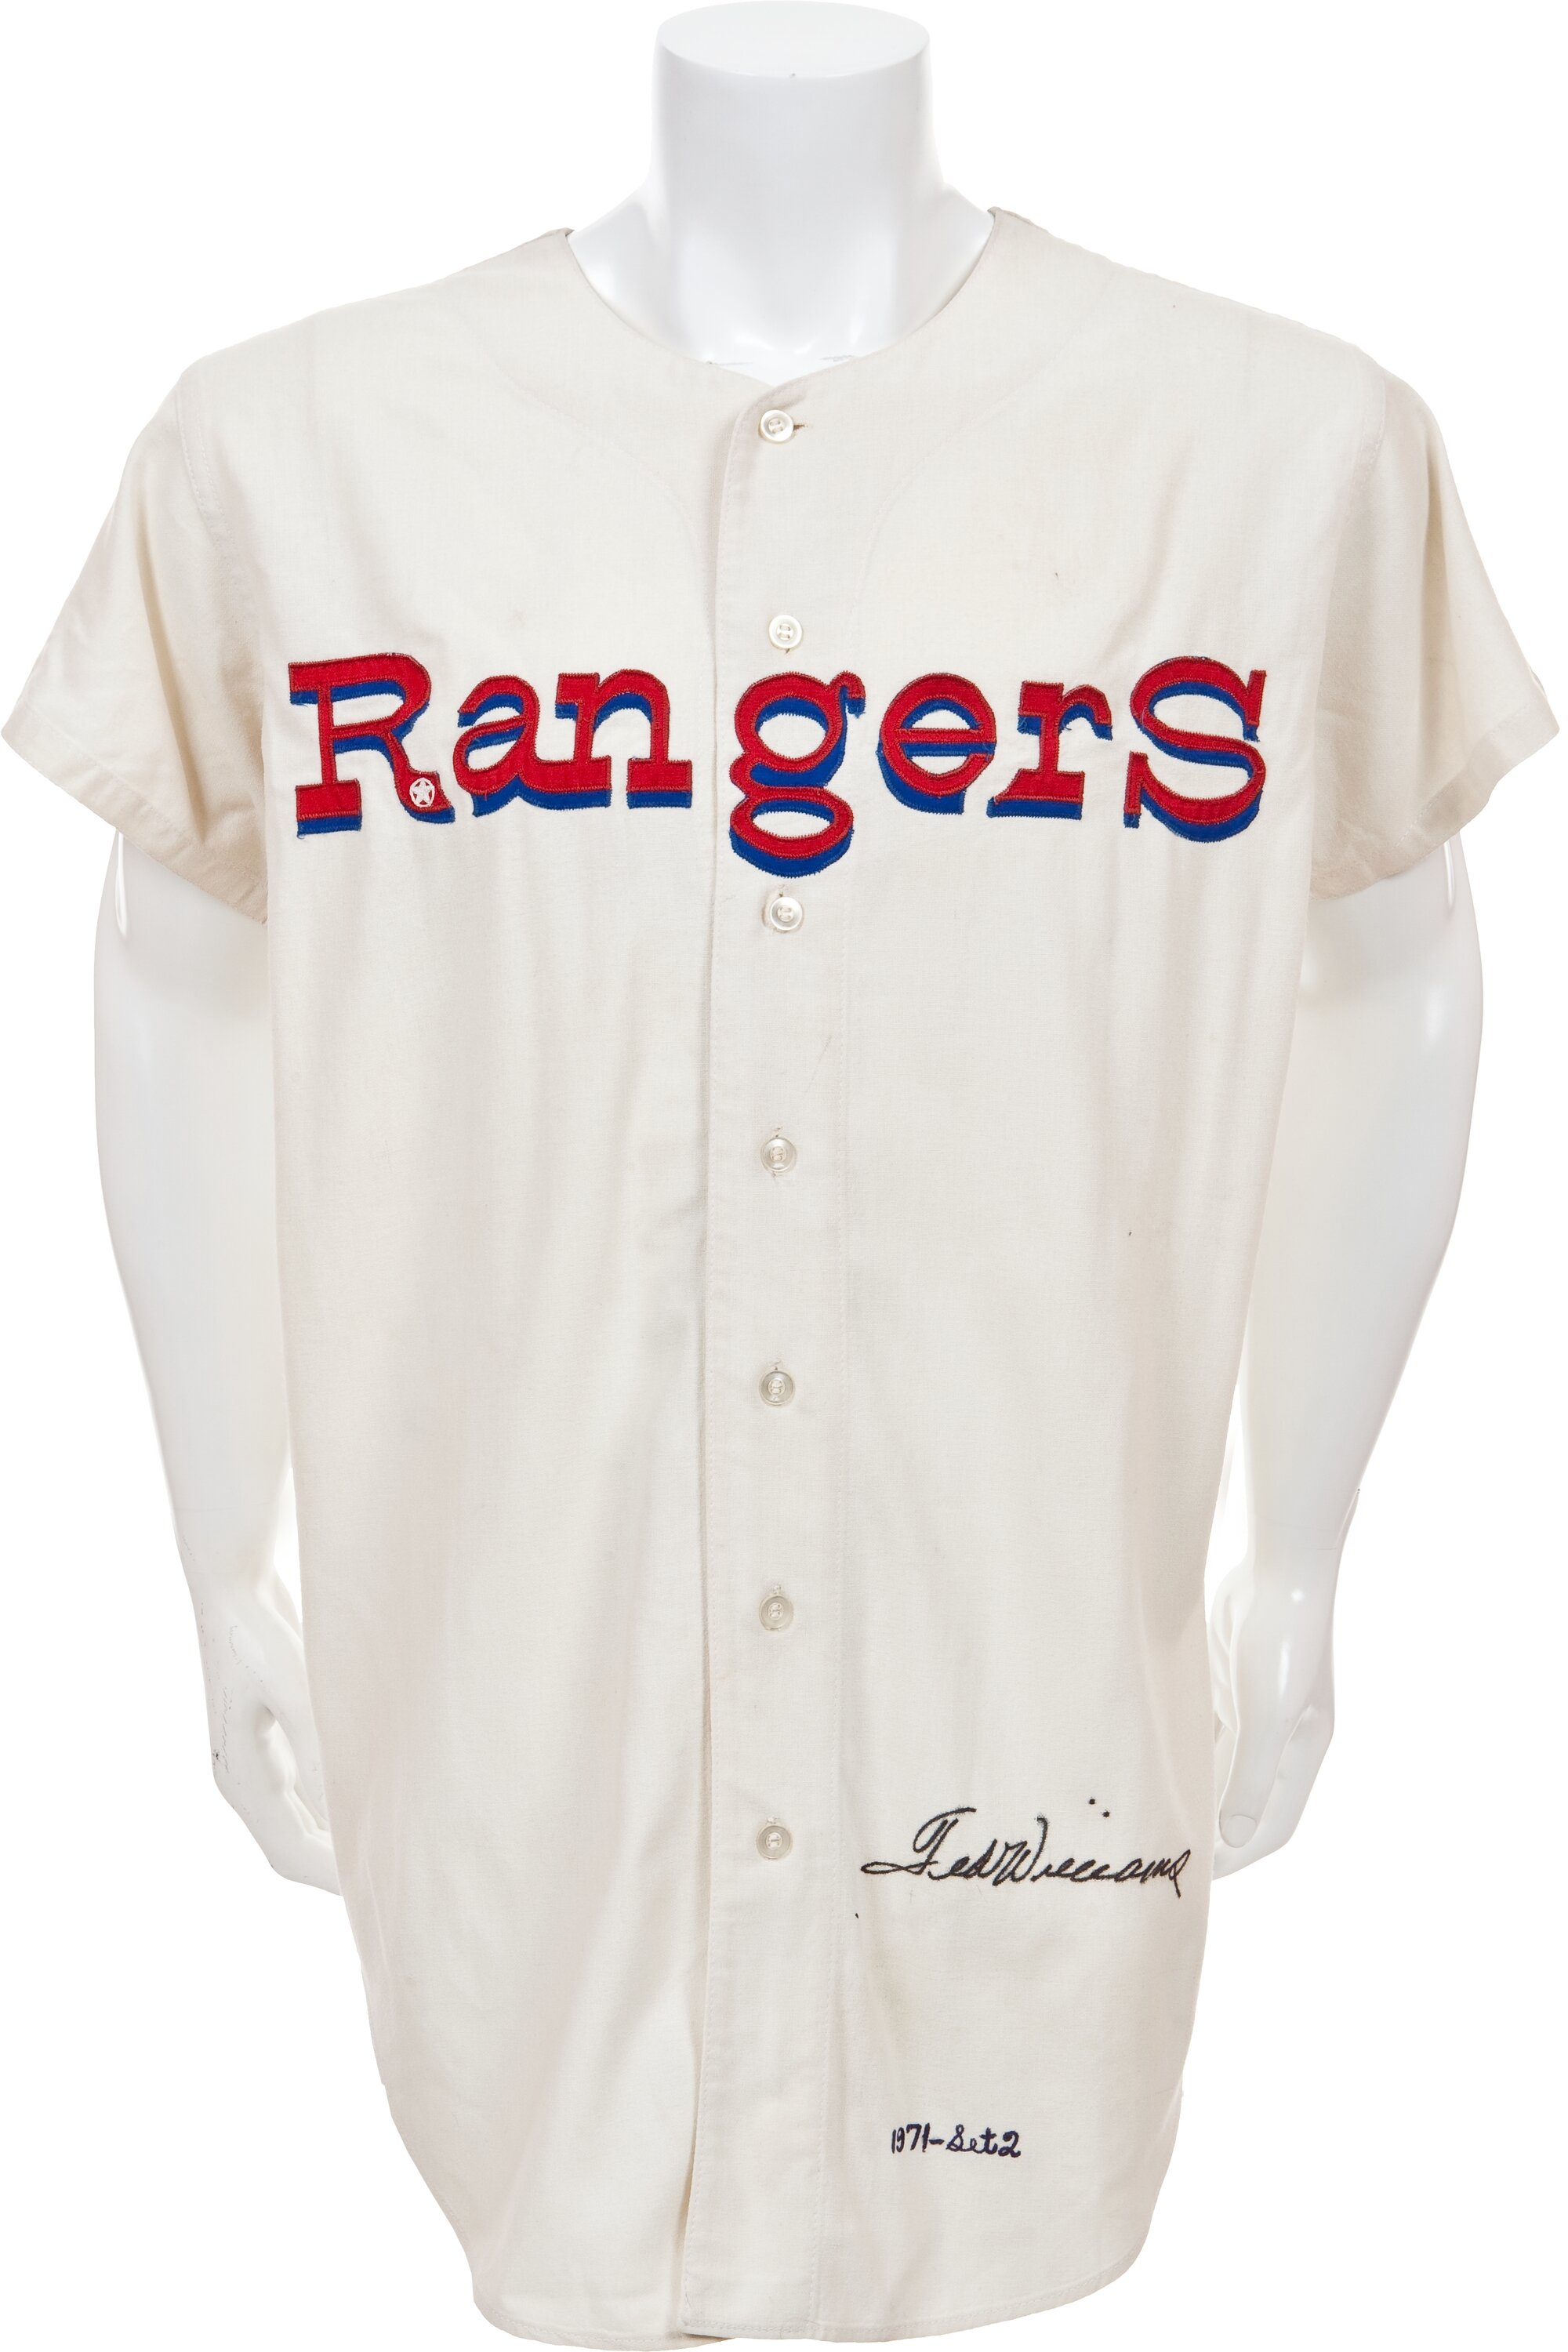 2002 Texas Rangers Game-Worn Throwback Jersey. During the summer